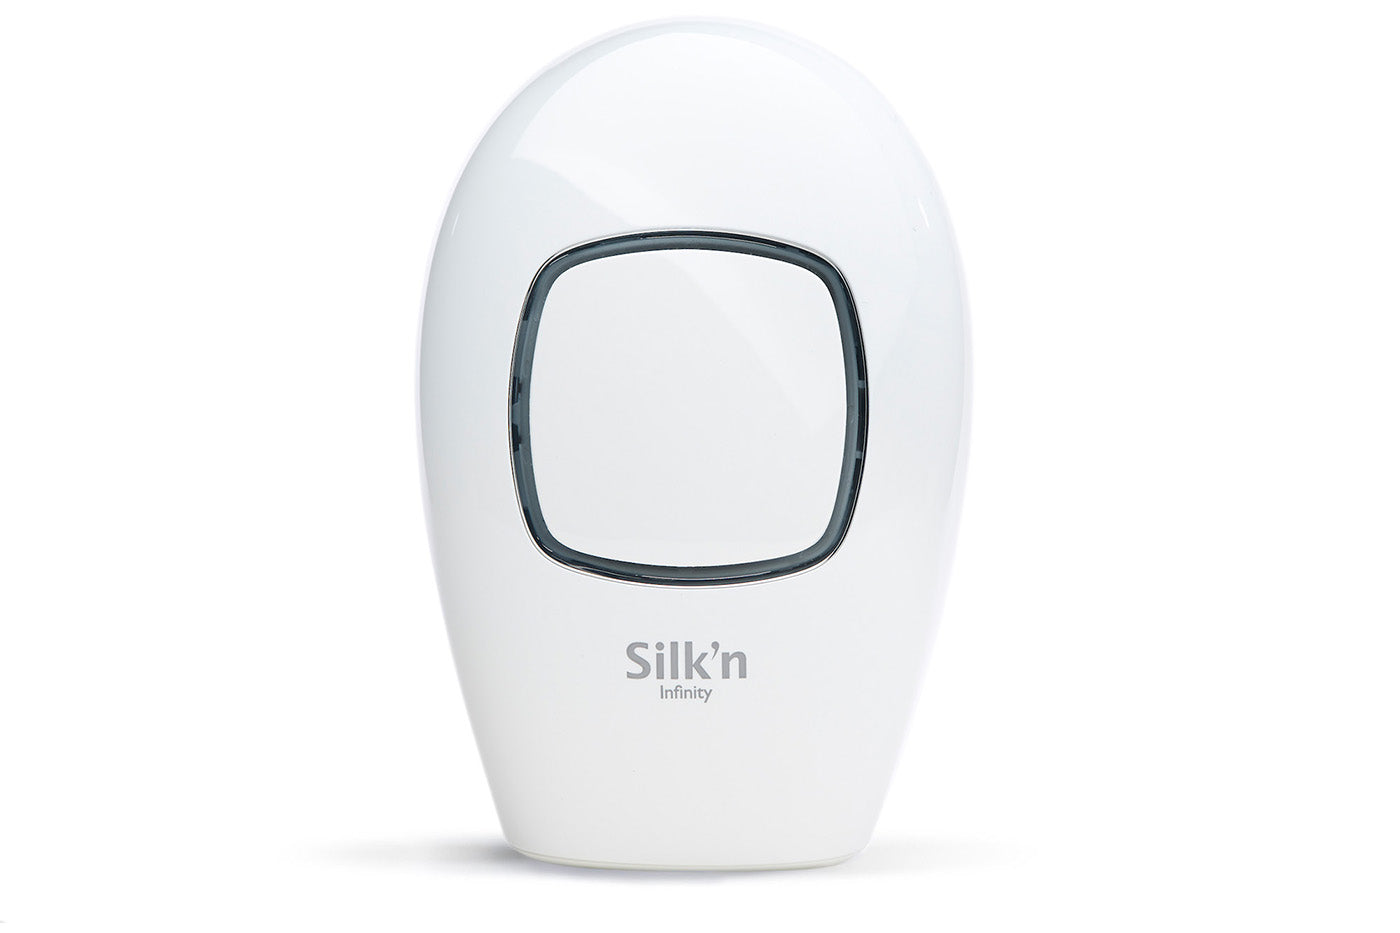 Silk?n Infinity - At Home Permanent Hair Removal for Women and Men